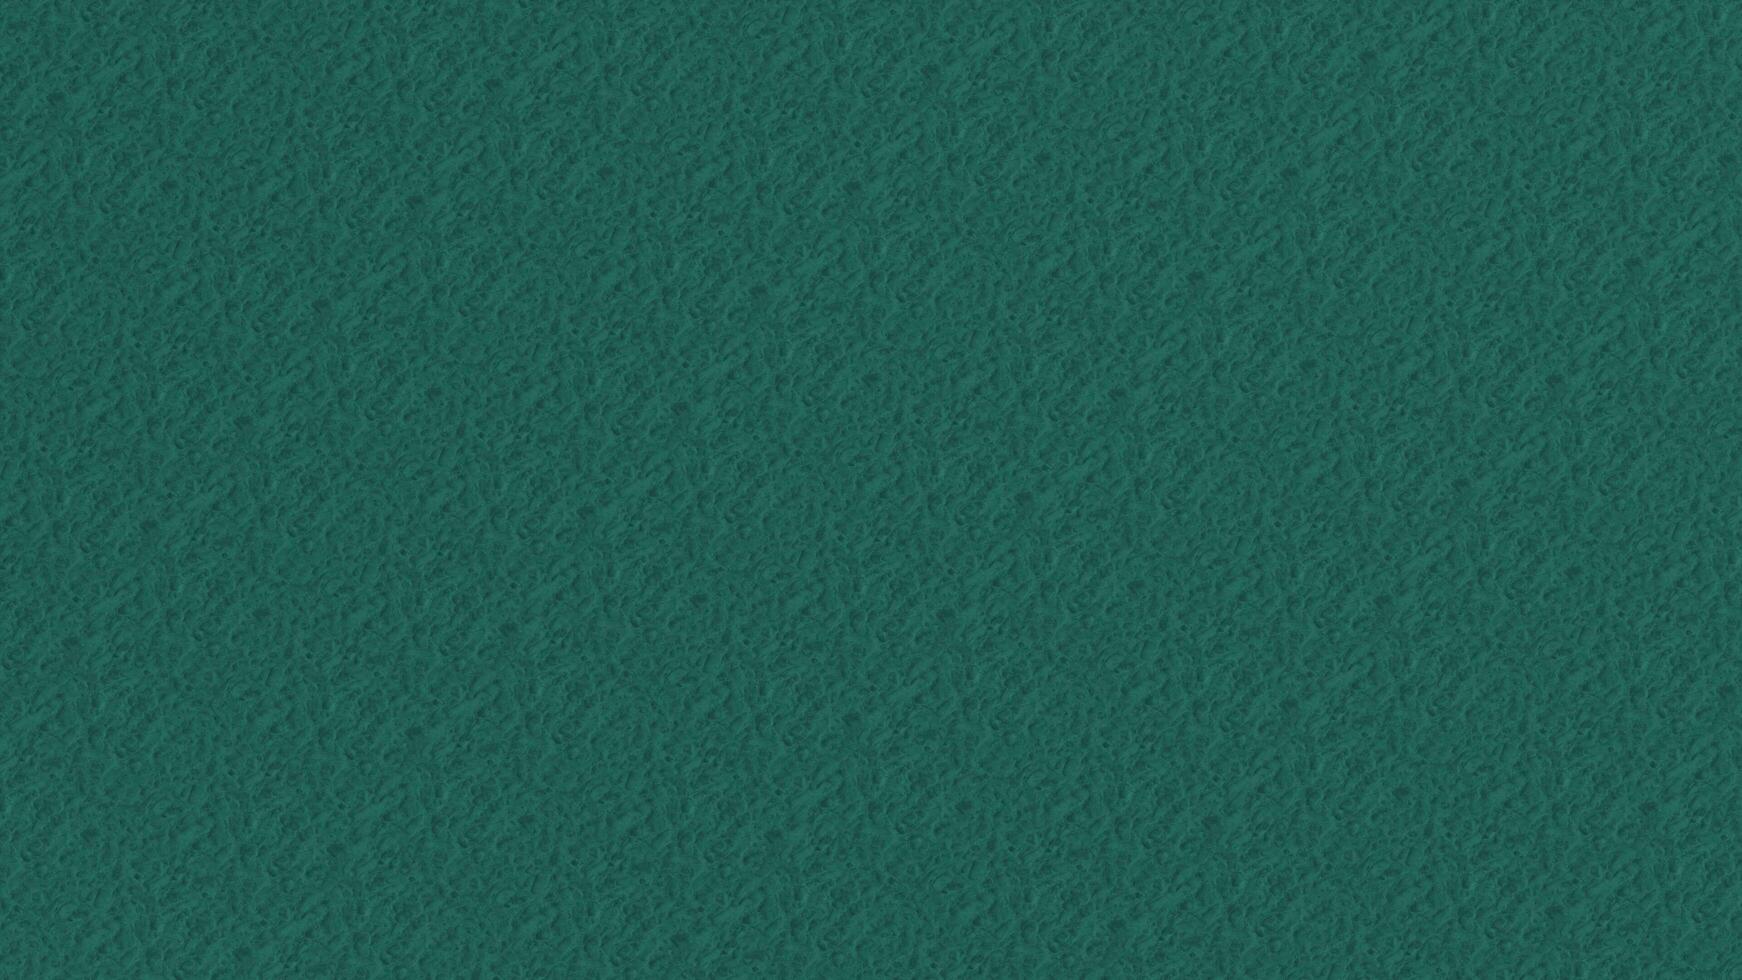 Concrete wall green texture for background or cover photo